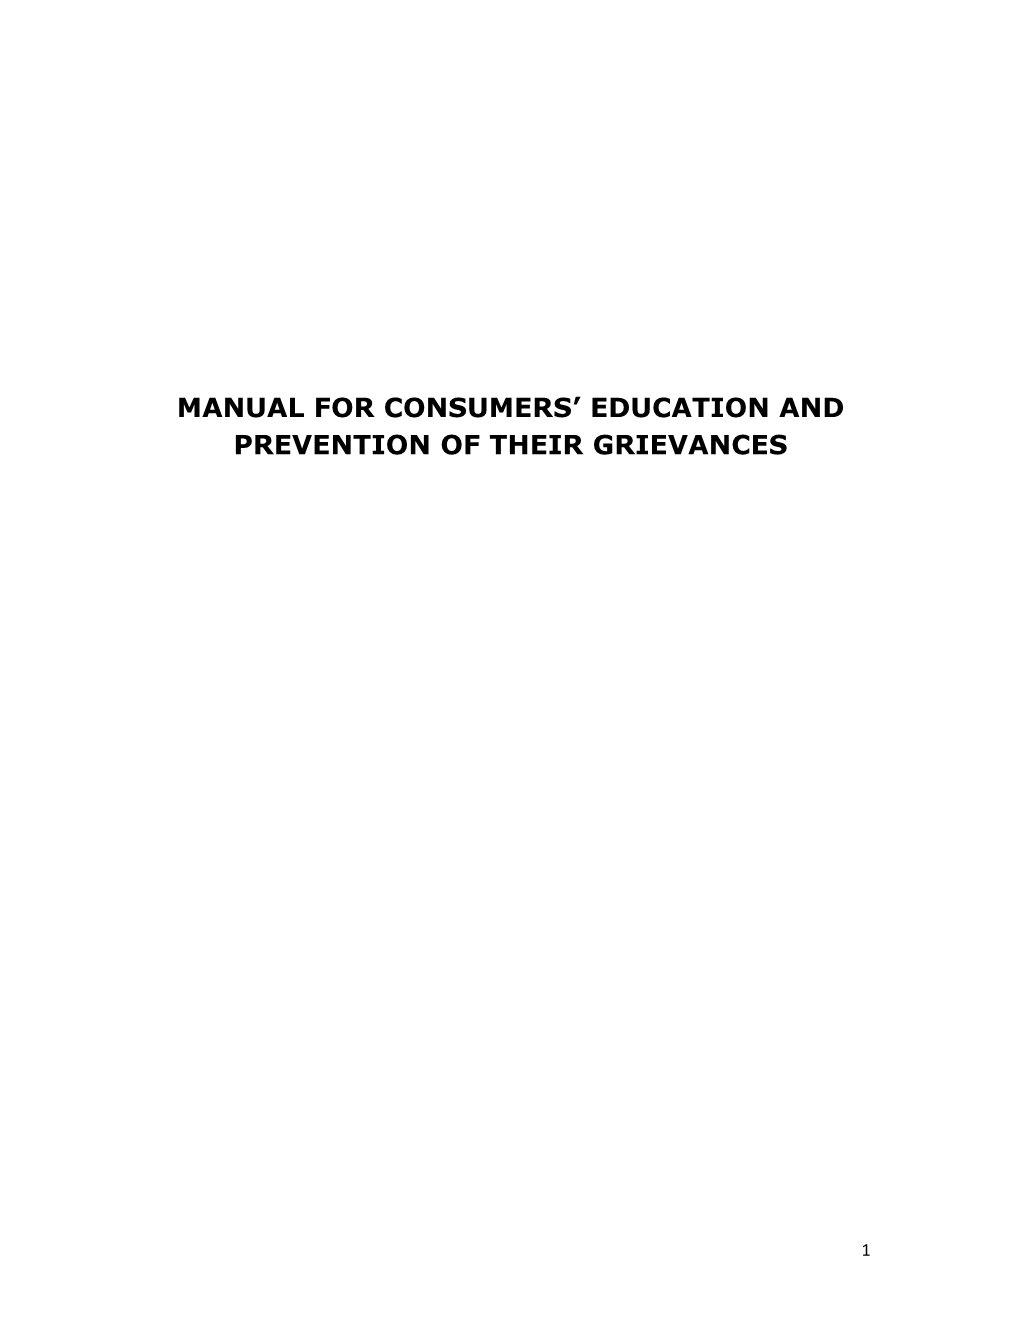 Manual for Consumers Education and Prevention of Their Grievances